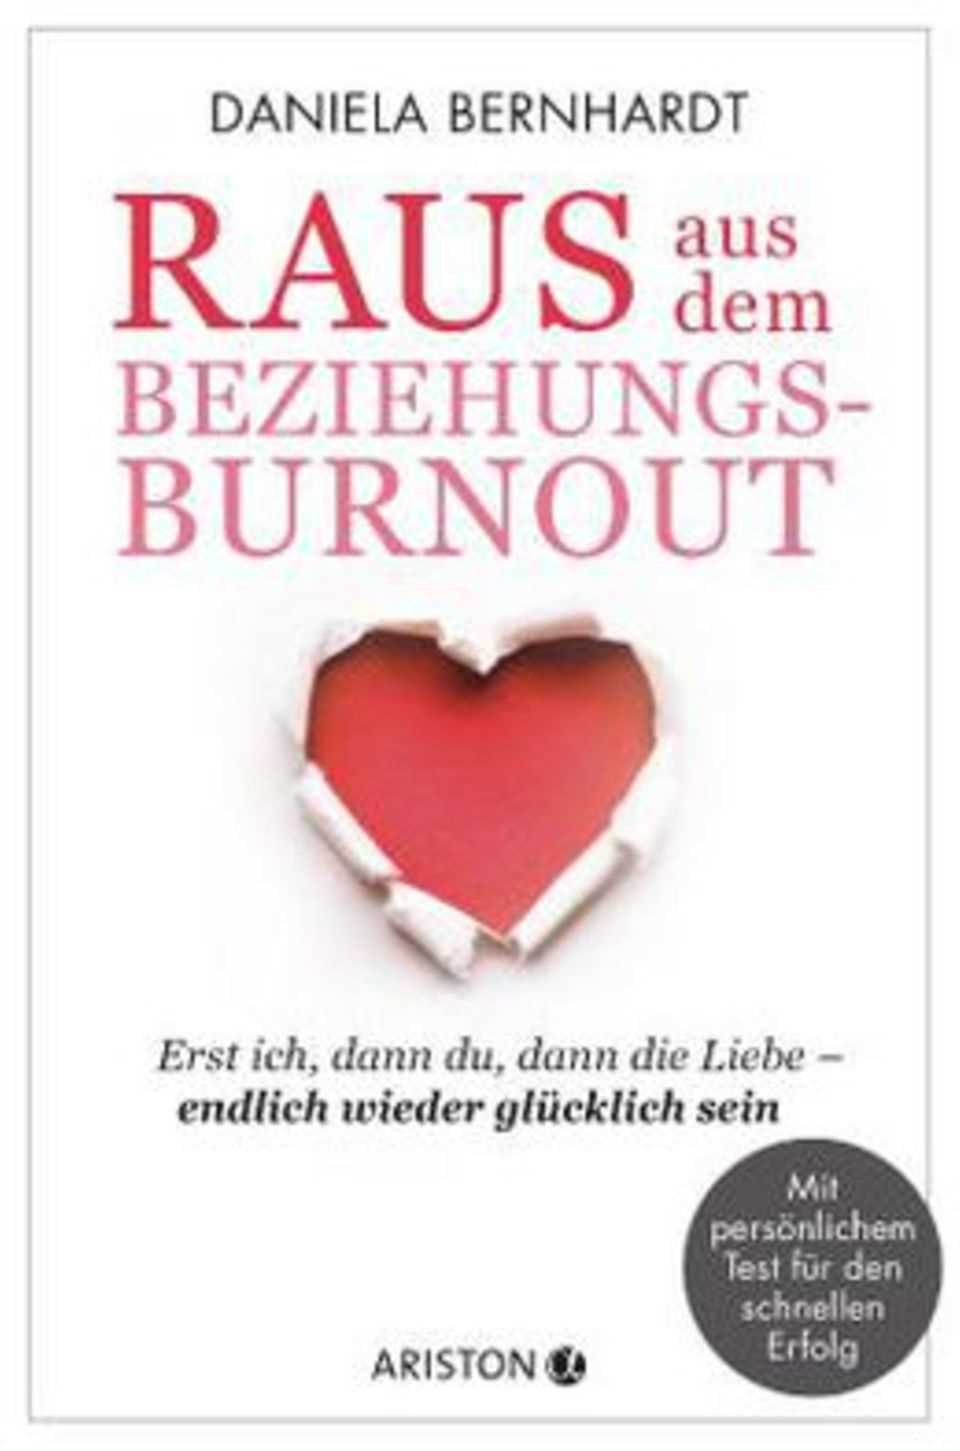 AEG method: book cover "Get out of relationship burnout"